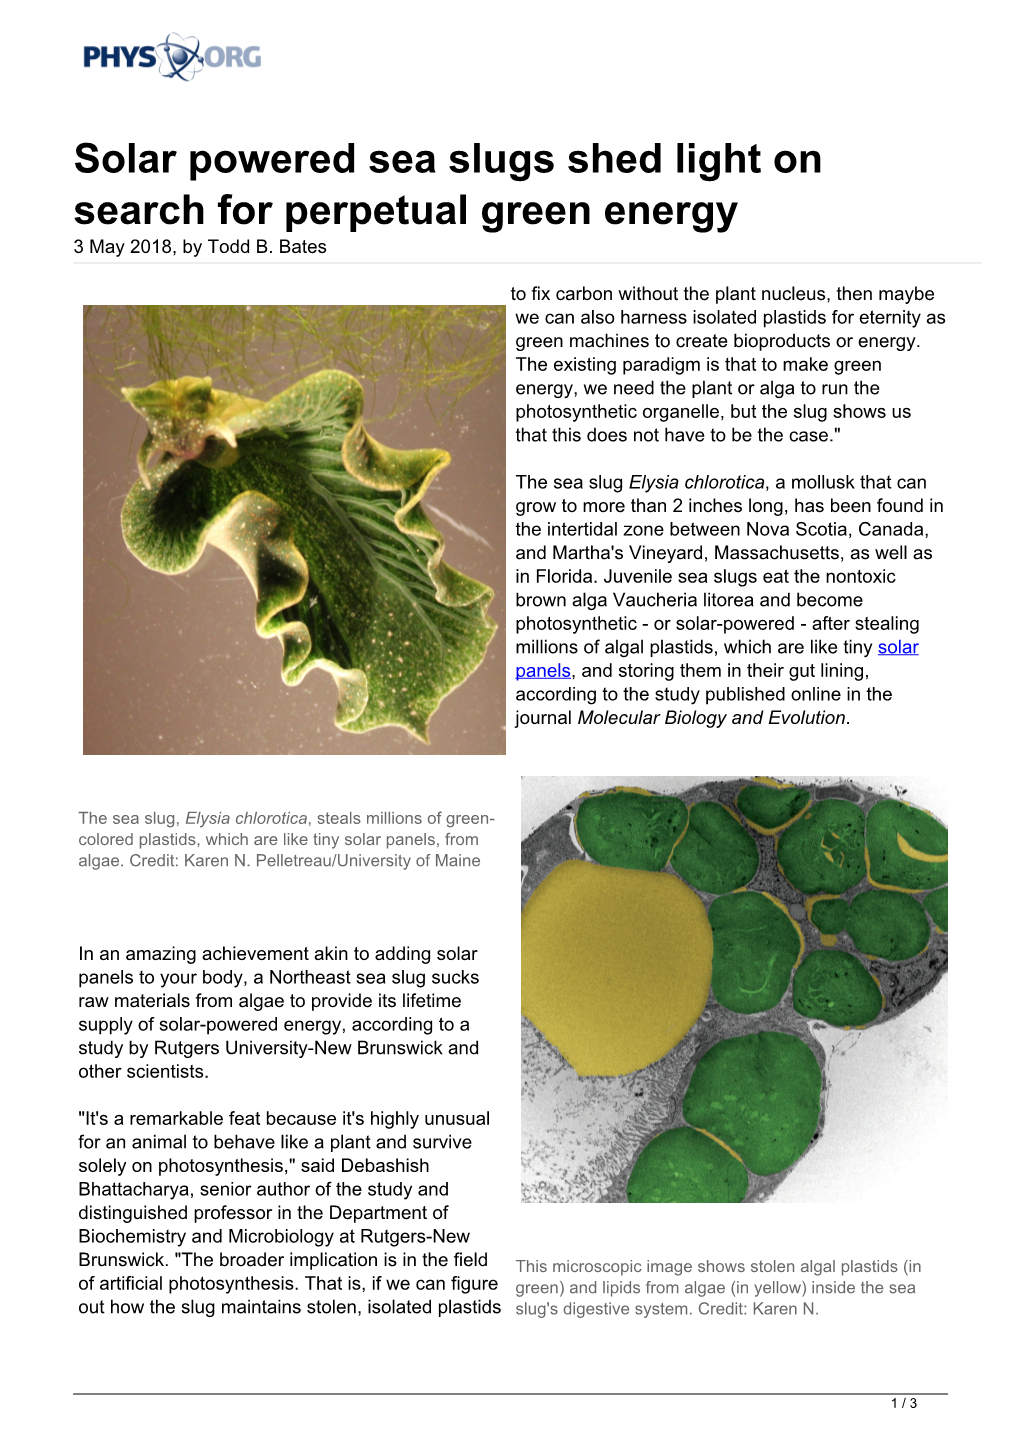 Solar Powered Sea Slugs Shed Light on Search for Perpetual Green Energy 3 May 2018, by Todd B